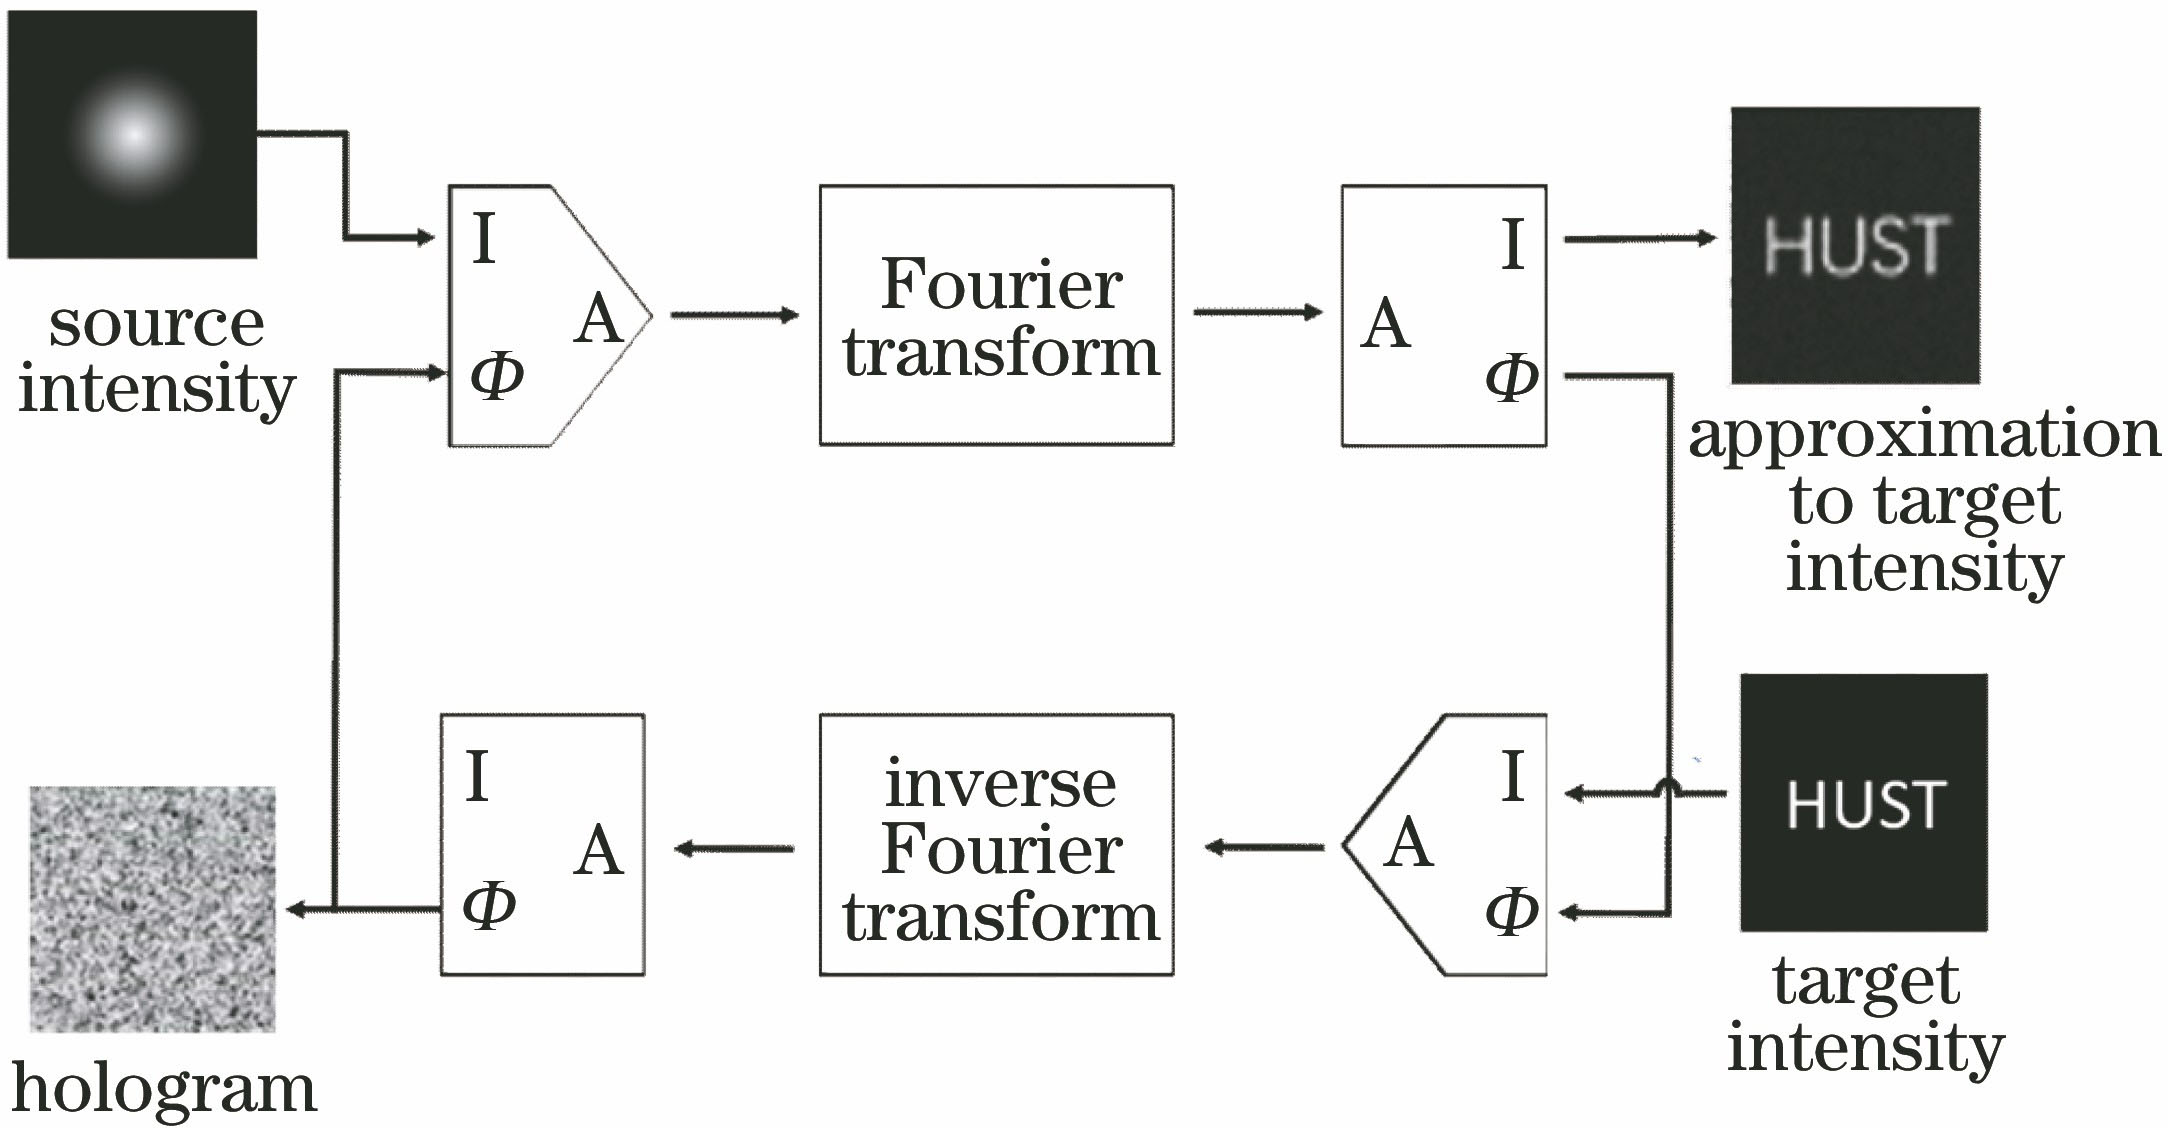 Flowchart of the GS iteration algorithm[19]